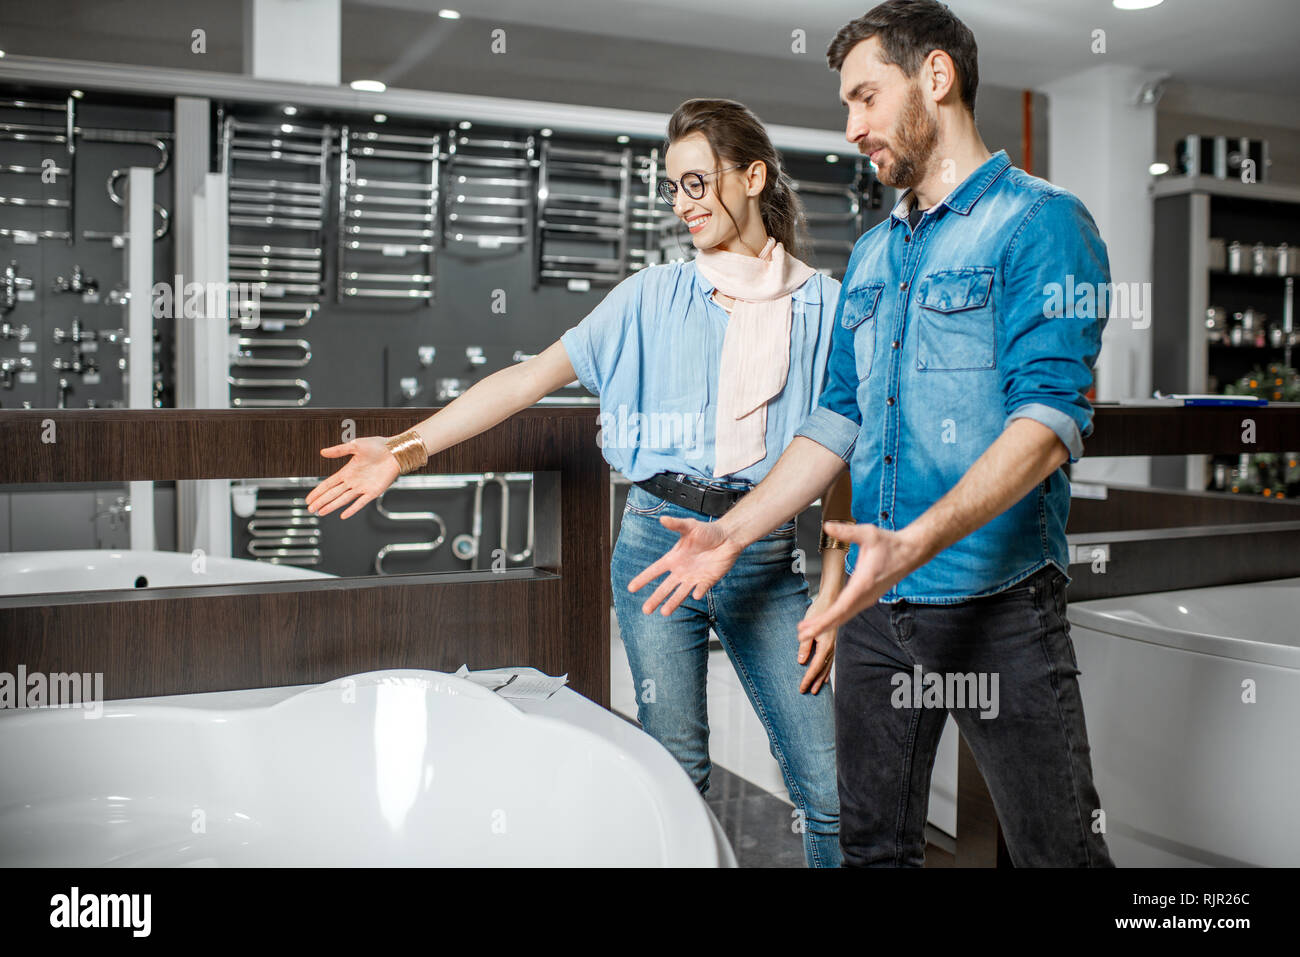 Man and woman choosing new bathtube standing together in the plumbing shop Stock Photo